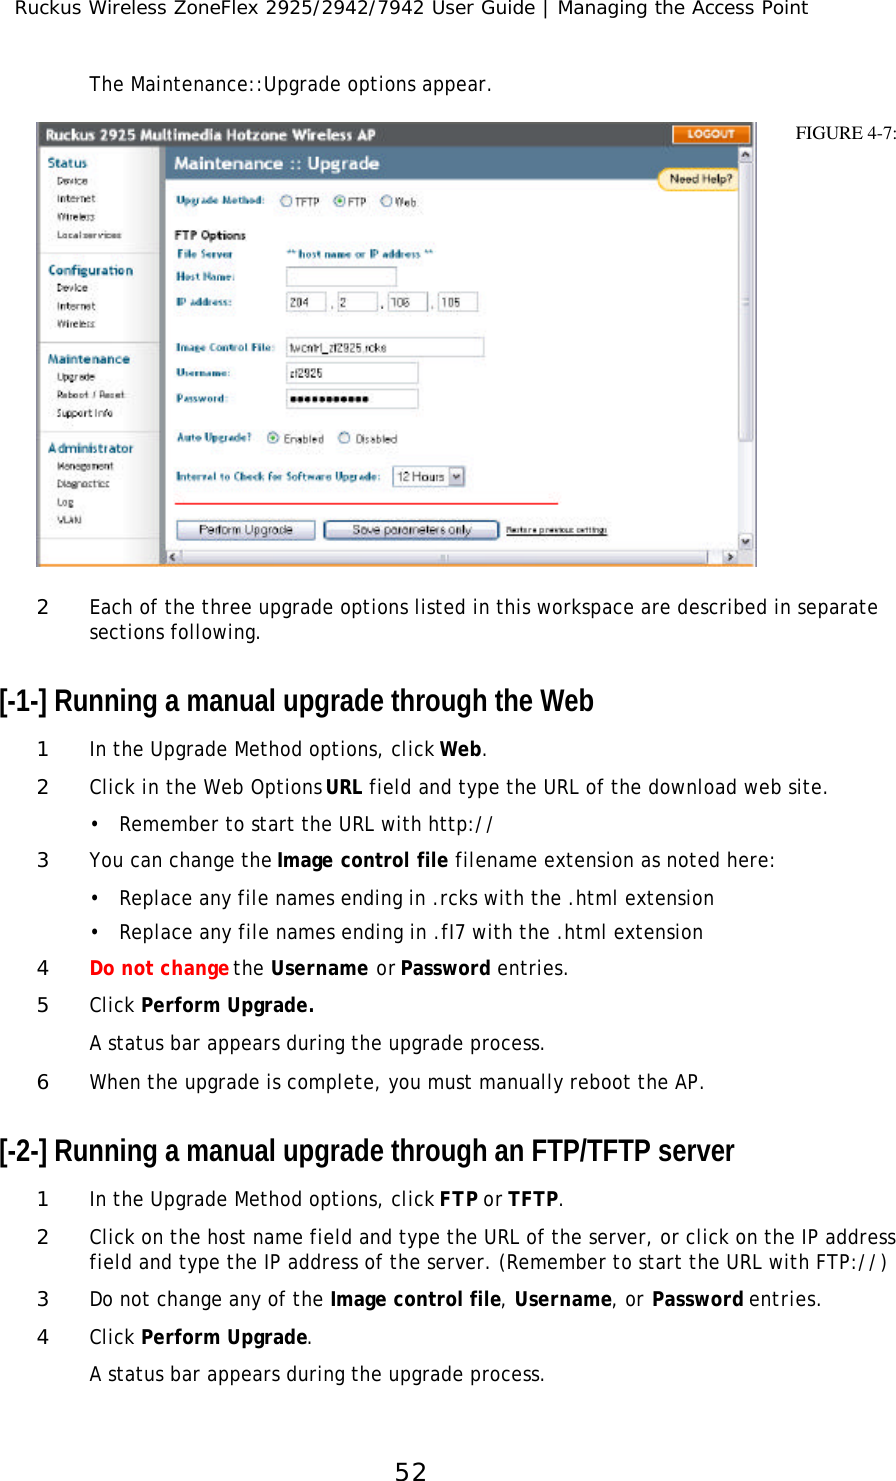 Ruckus Wireless ZoneFlex 2925/2942/7942 User Guide | Managing the Access Point52The Maintenance::Upgrade options appear. 2Each of the three upgrade options listed in this workspace are described in separate sections following.[-1-] Running a manual upgrade through the Web1In the Upgrade Method options, click Web.2Click in the Web Options URL field and type the URL of the download web site. •Remember to start the URL with http://3You can change the Image control file filename extension as noted here:•Replace any file names ending in .rcks with the .html extension•Replace any file names ending in .fI7 with the .html extension4Do not change the Username or Password entries.5Click Perform Upgrade. A status bar appears during the upgrade process.6When the upgrade is complete, you must manually reboot the AP.[-2-] Running a manual upgrade through an FTP/TFTP server1In the Upgrade Method options, click FTP or TFTP.2Click on the host name field and type the URL of the server, or click on the IP address field and type the IP address of the server. (Remember to start the URL with FTP://)3Do not change any of the Image control file, Username, or Password entries.4Click Perform Upgrade. A status bar appears during the upgrade process.FIGURE 4-7: